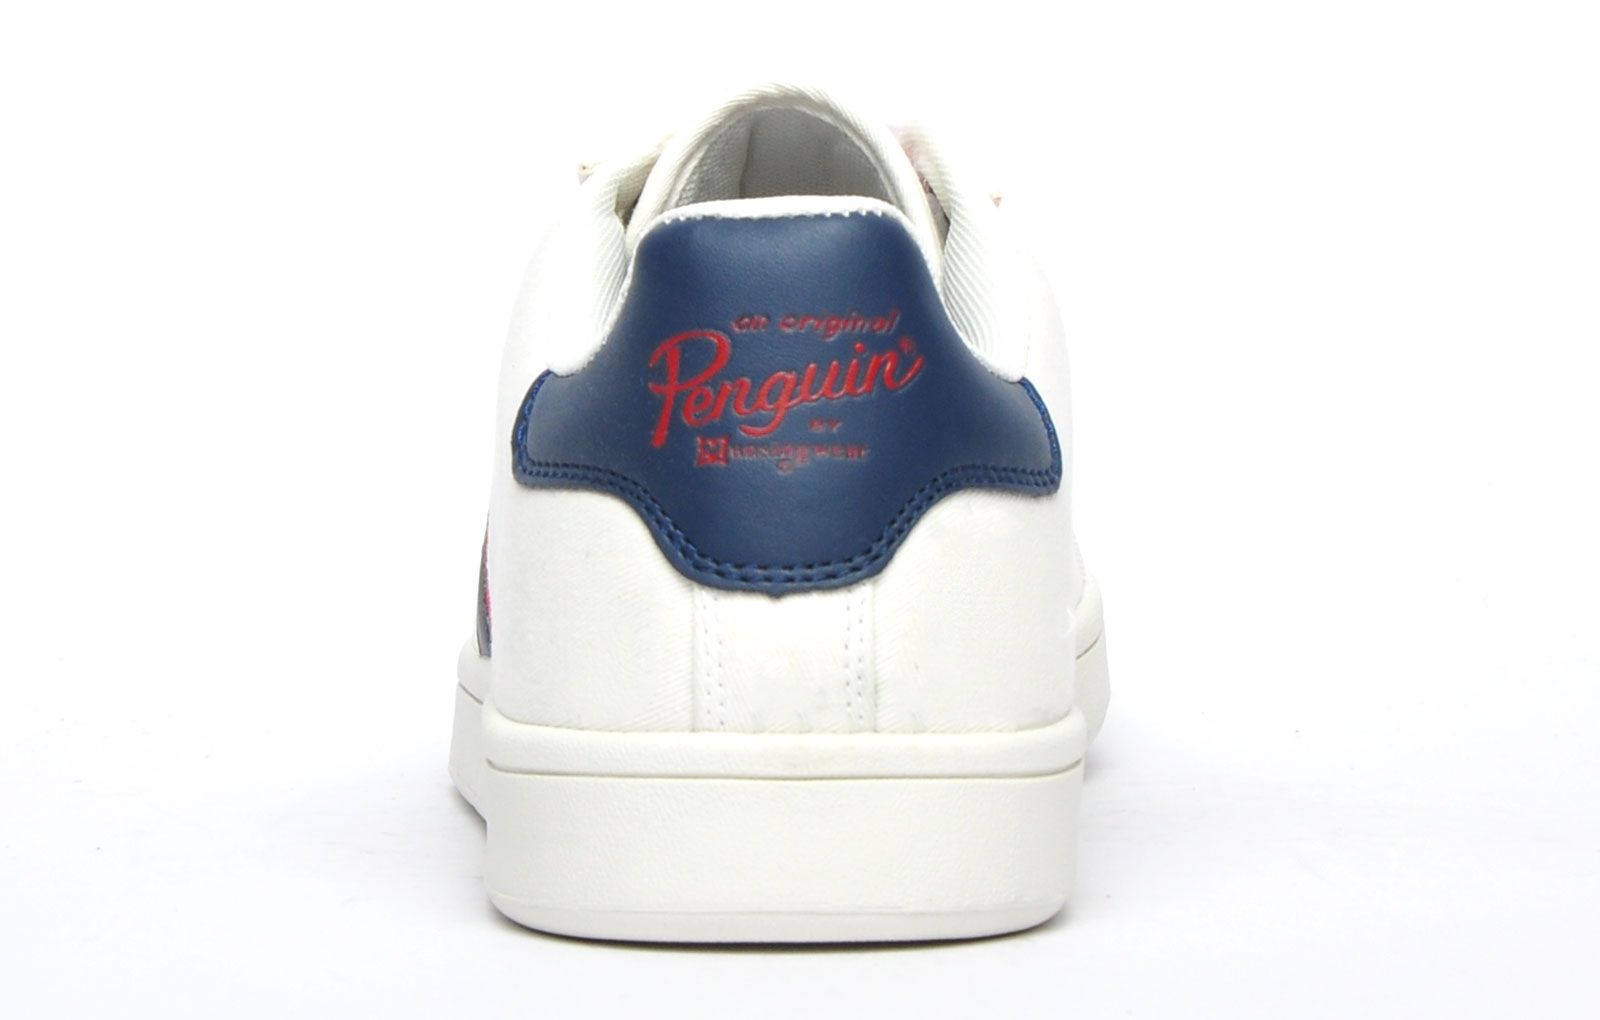 Tap into sleek, contemporary casual style with these Steadman trainers from iconic menswear brand, Penguin Original. The Penguin Steadman is a sleek and refined everyday trainer thats packed full of authentic American retro styling. Bringing heritage inspired style to your casual outfits, the Penguin Steadman is a versatile choice for the new season. Crafted from a textile canvas upper and featuring stripe detailing to the sides finished with Penguin branding to the tongue, side and heel, this is a must have trainer for any stylish man looking to elevate his casual look.
 - Canvas / textile upper
 - Soft padded interior
 - Textured vulc outsole
 - Classic lace up fastening
 - Original Penguin branding throughout
 Please Note:
 This trainer is being sold as a B grade as there are imperfections in the way of small stain marks which are visible on the heel of the shoes. These imperfections are minimal and when worn with trousers the marks will probably not be visible. Once the shoes have been worn once or twice the marks / imperfections will blend in with the overall look. If you are unhappy with your purchase, we will be happy to accept the shoes back as long as they are unworn.